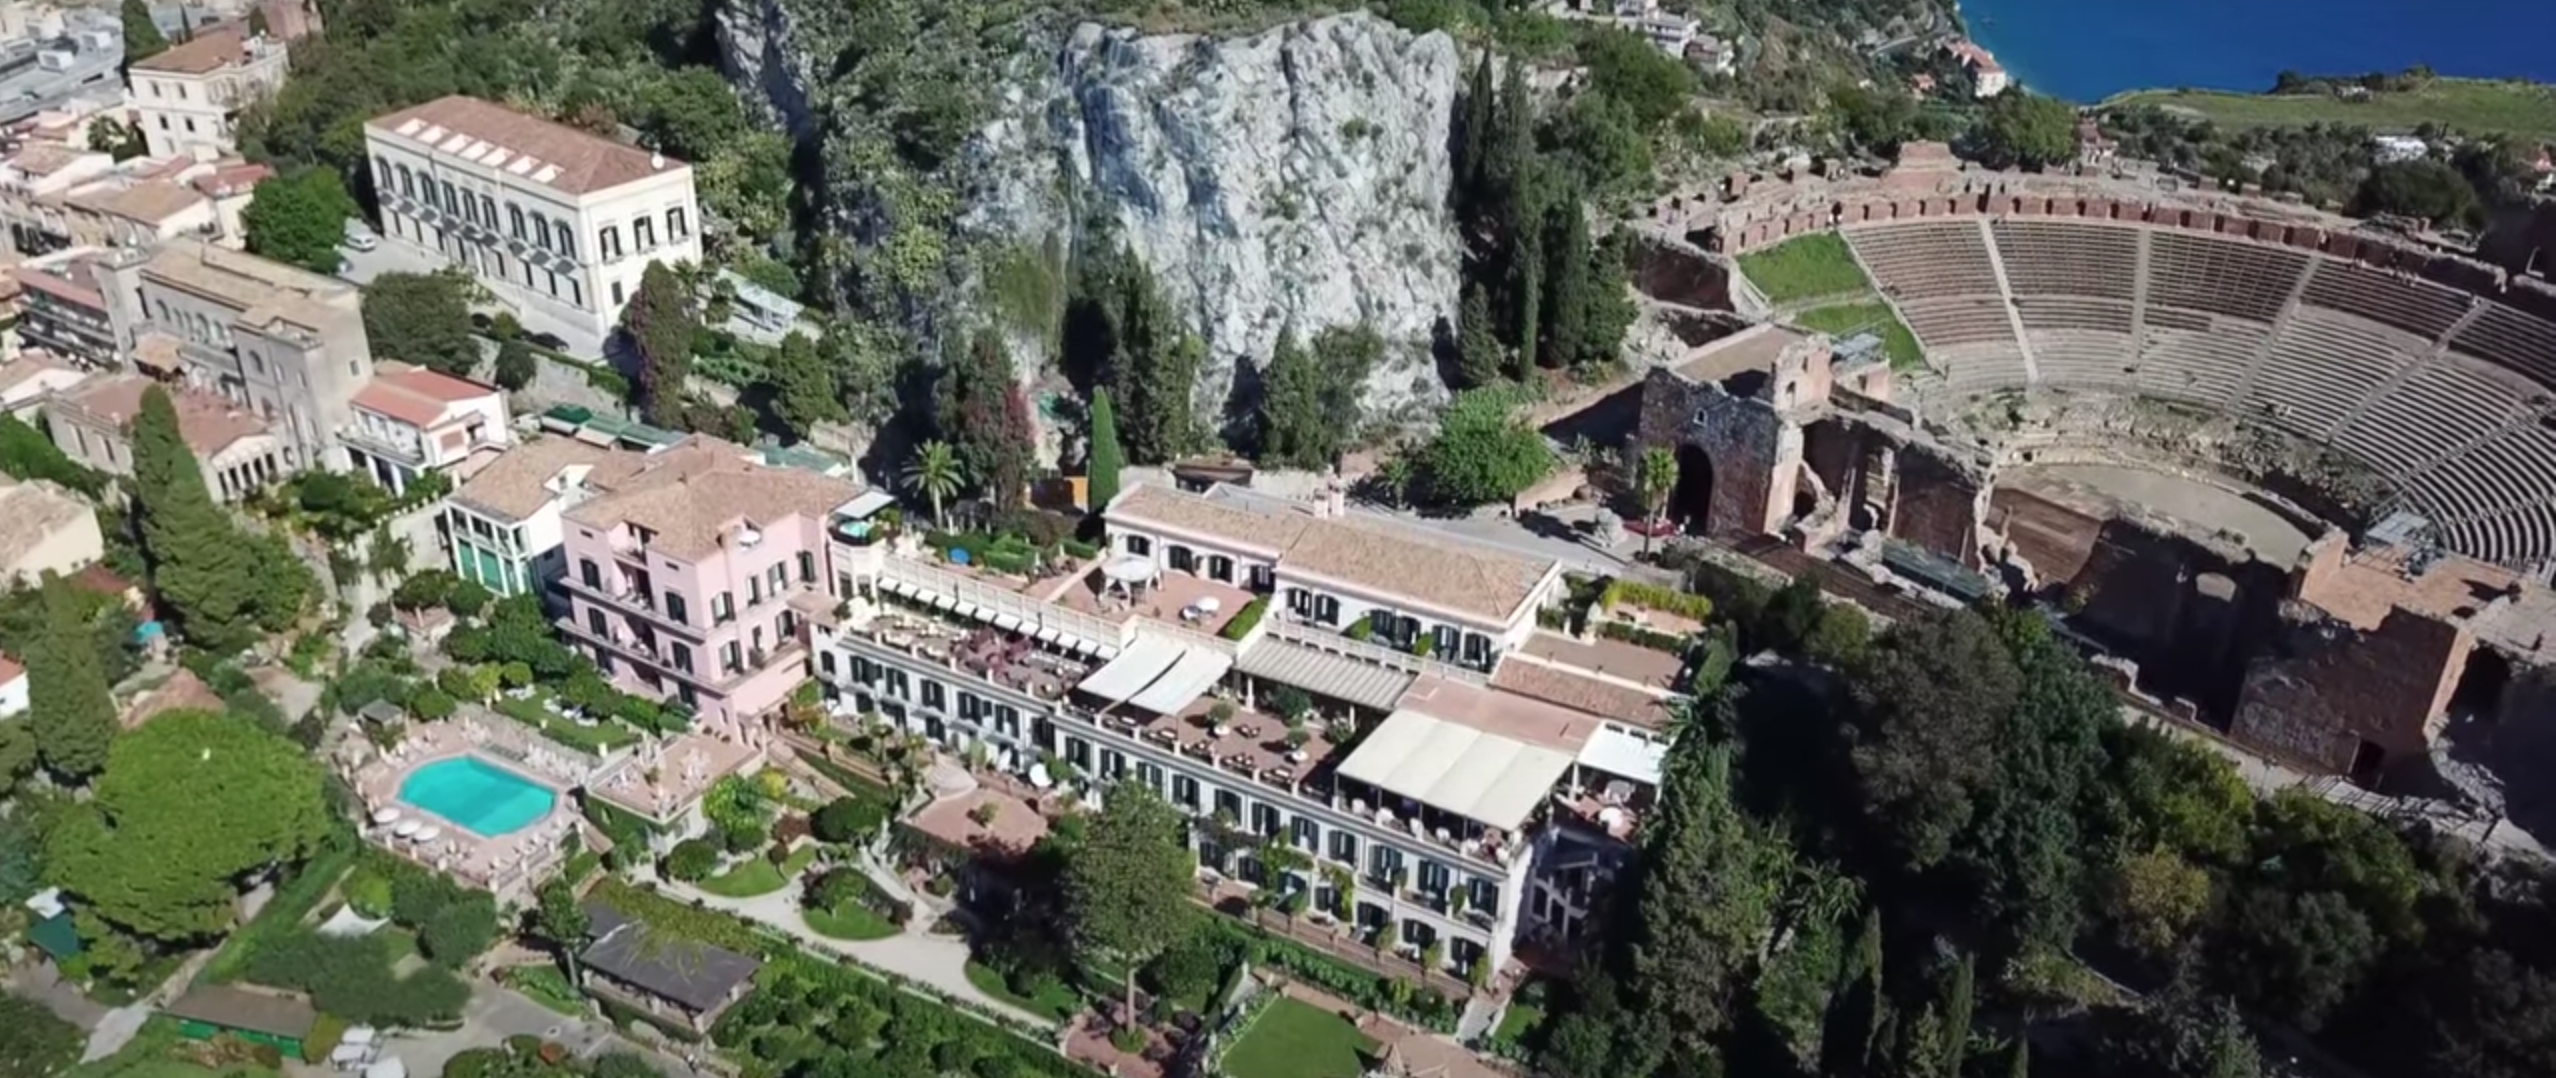 Is The White Lotus The Nicest Hotel In Taormina, Sicily?